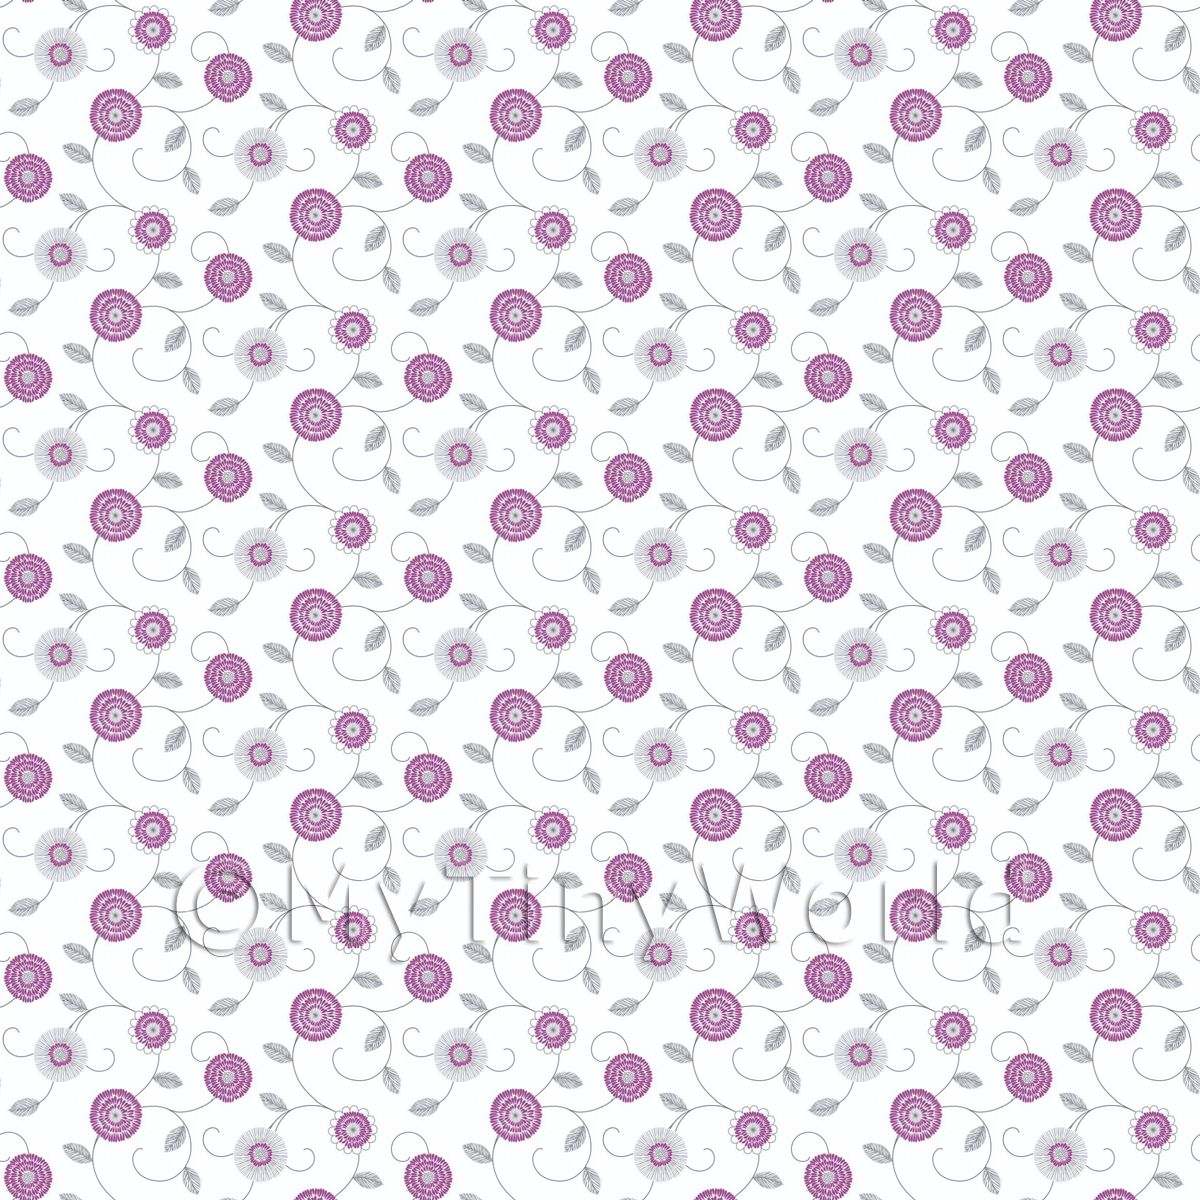 Dolls House Miniature Round Purple And White Flower Wallpaper 